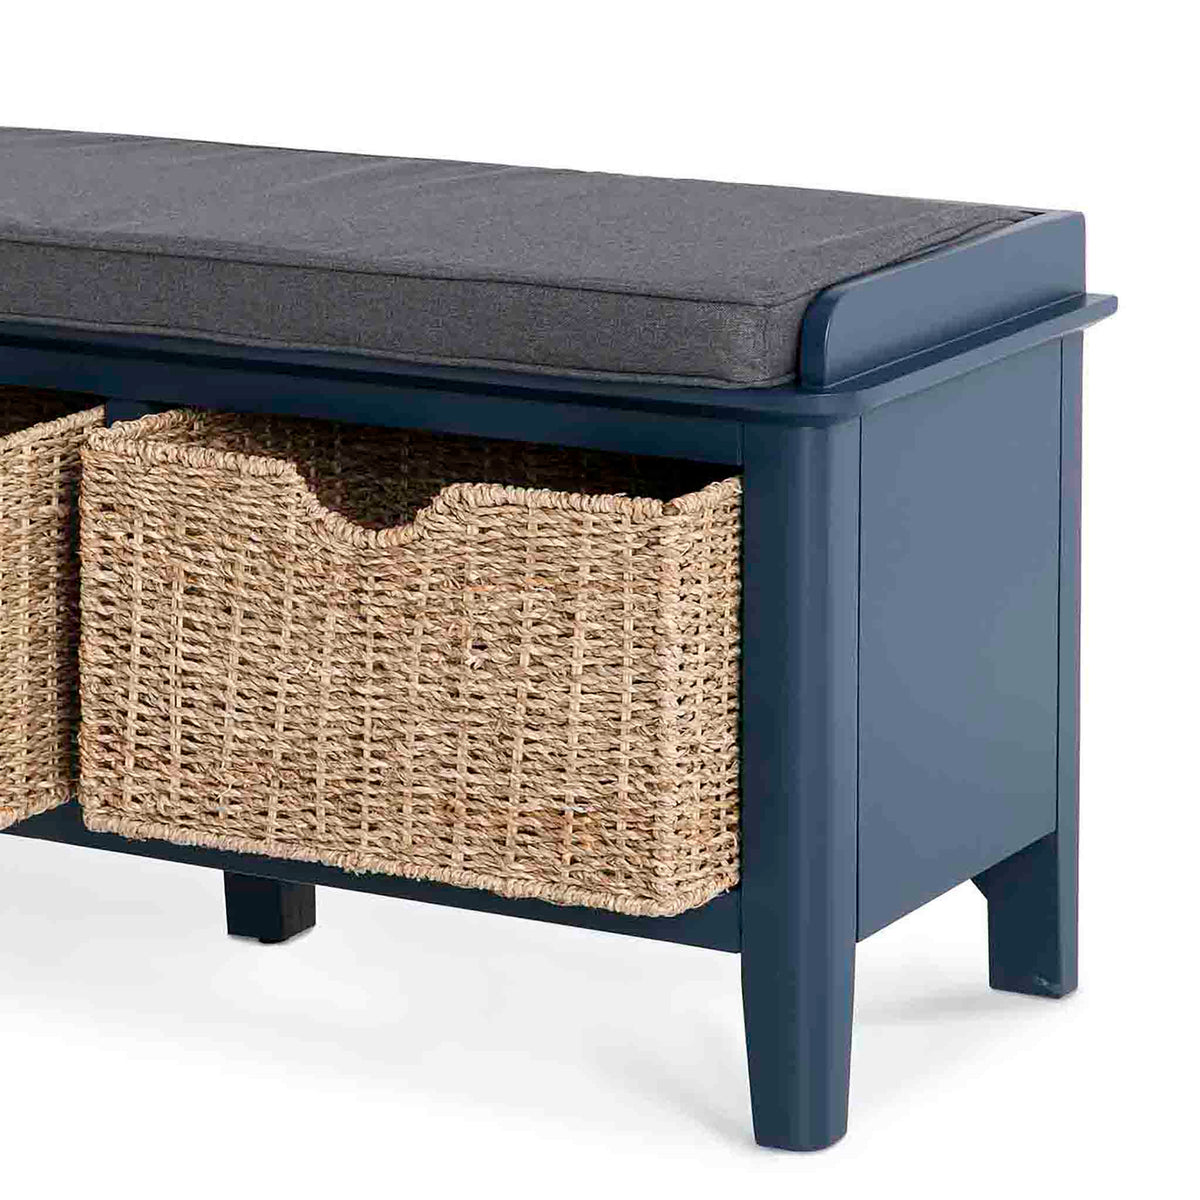 Stirling Blue Storage Bench - Close up with baskets pulled open